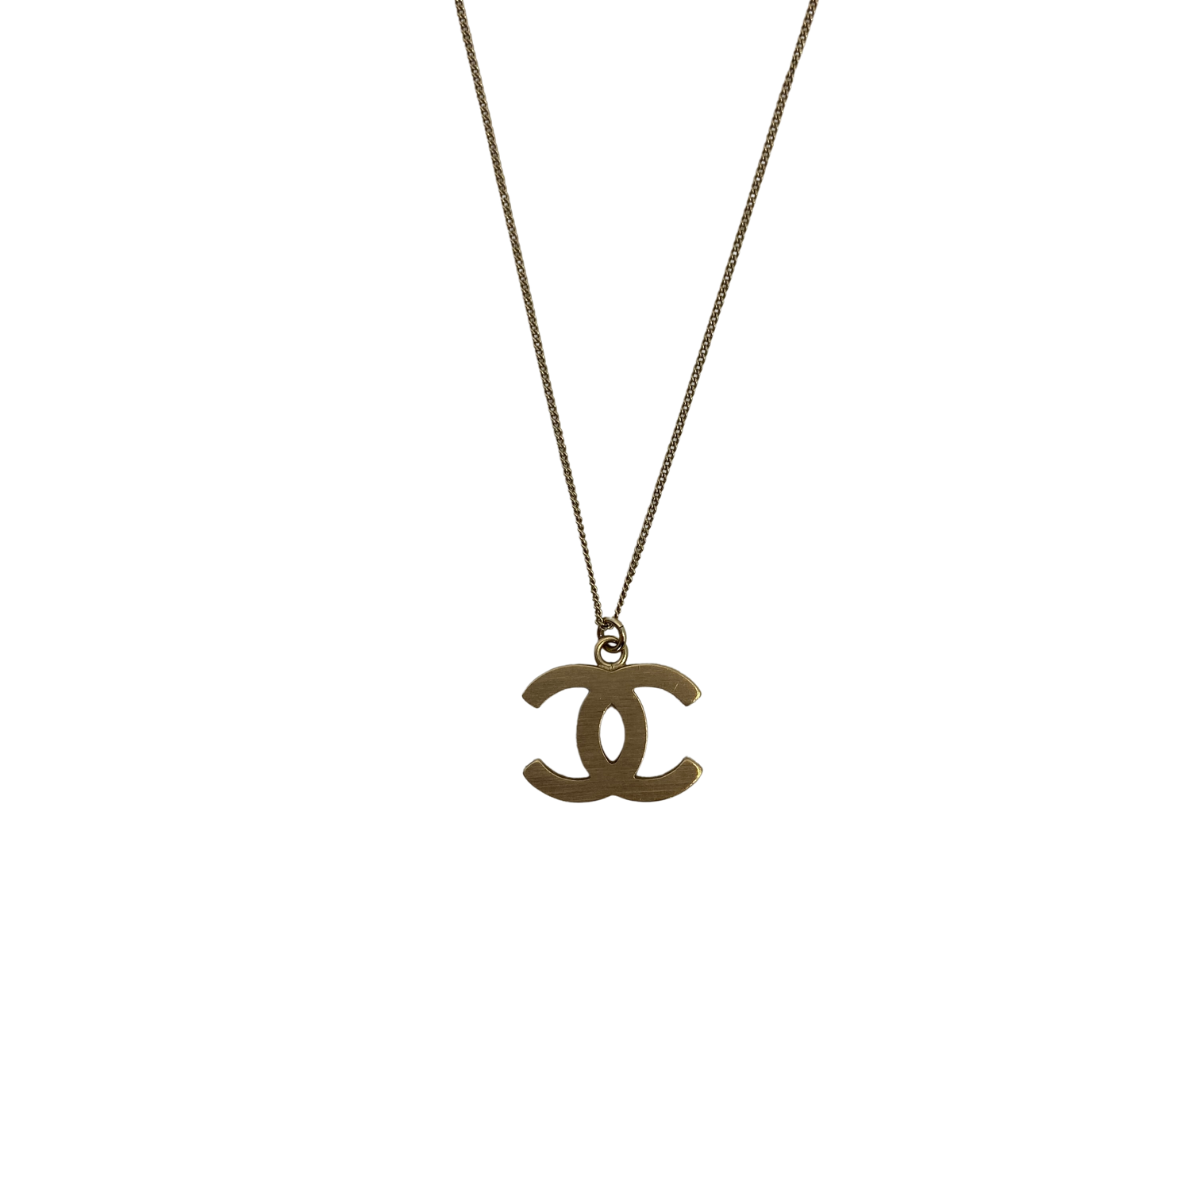 Cc necklace Chanel Gold in Gold plated - 31910787